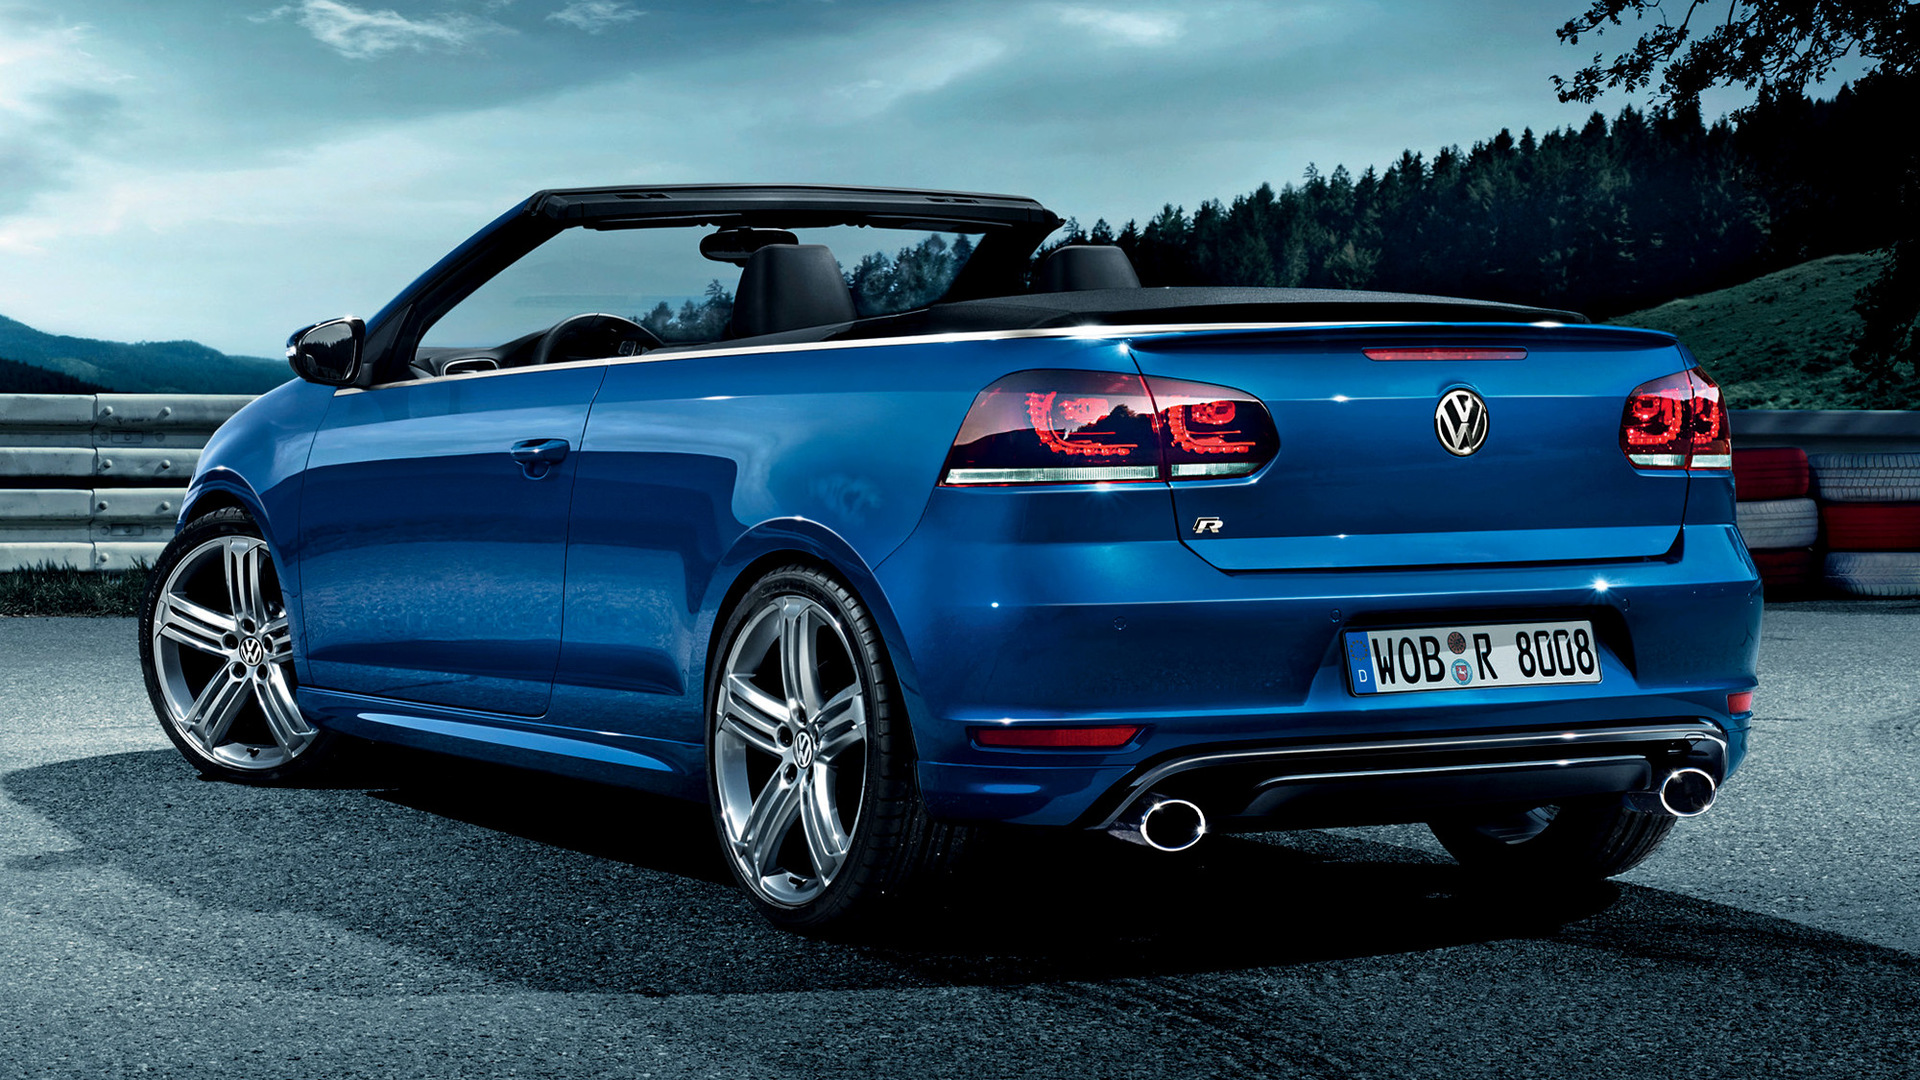 Volkswagen Golf R Cabriolet 2013 Wallpapers and HD Images